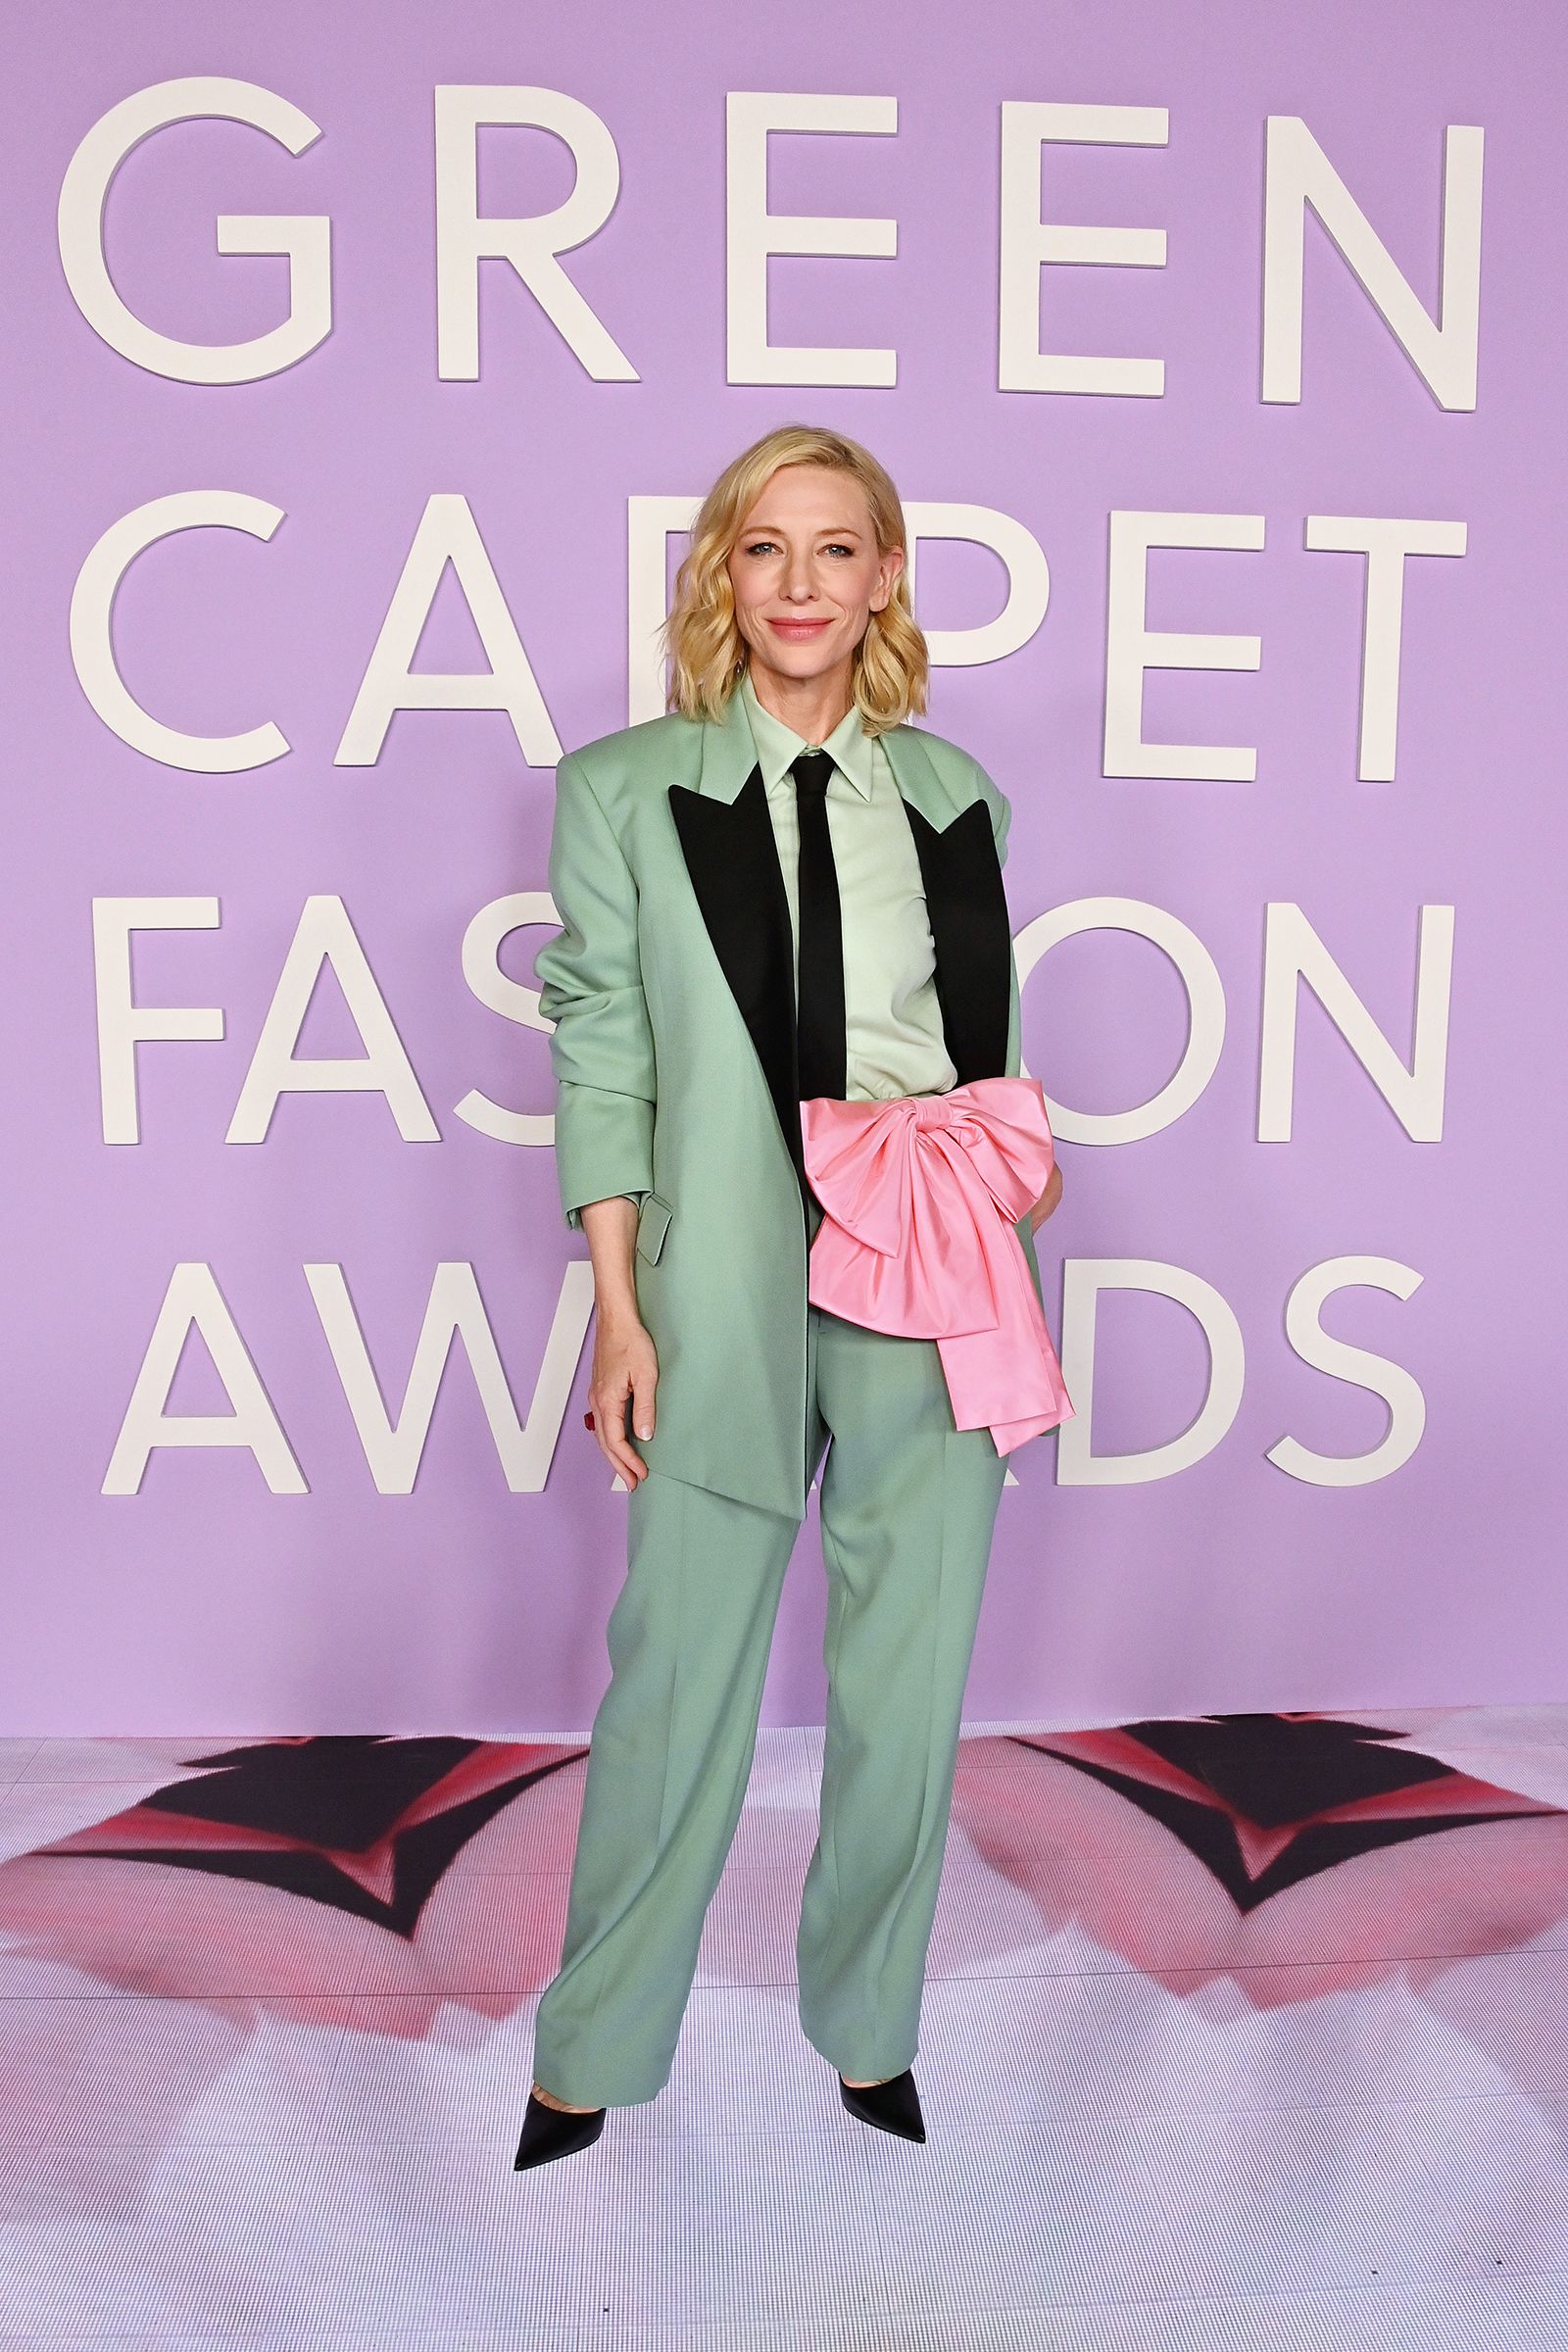 Cate Blanchett attends the Green Carpet Fashion Awards 2023 at NeueHouse Hollywood on March 9, 2023 in Hollywood, California.